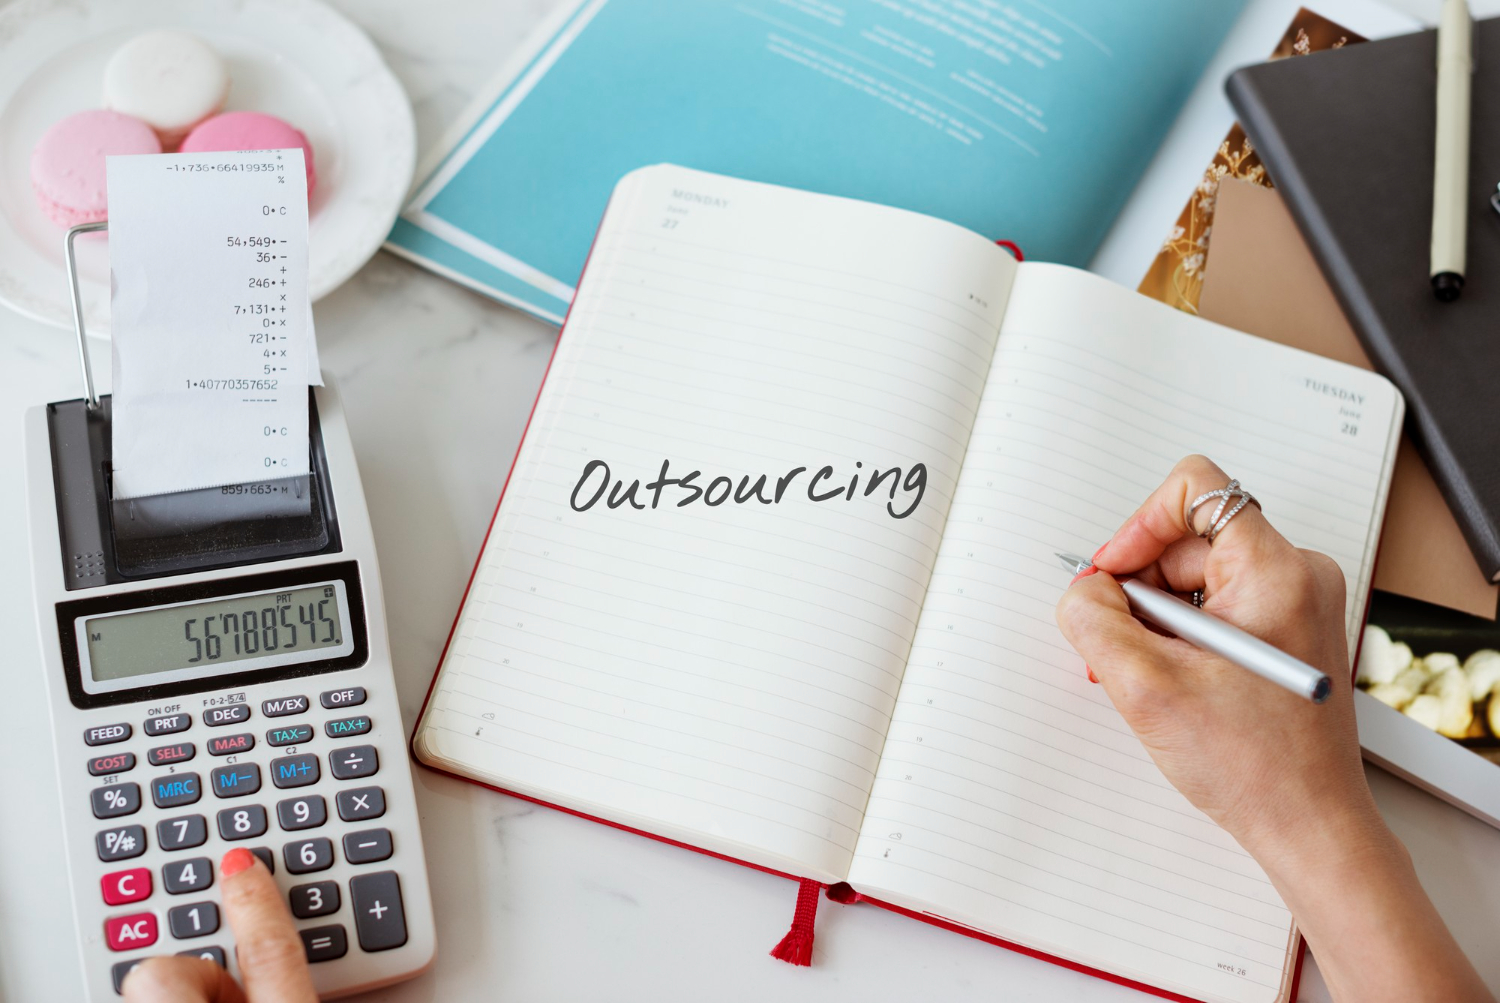 A person writing outsourcing and calculating the cost